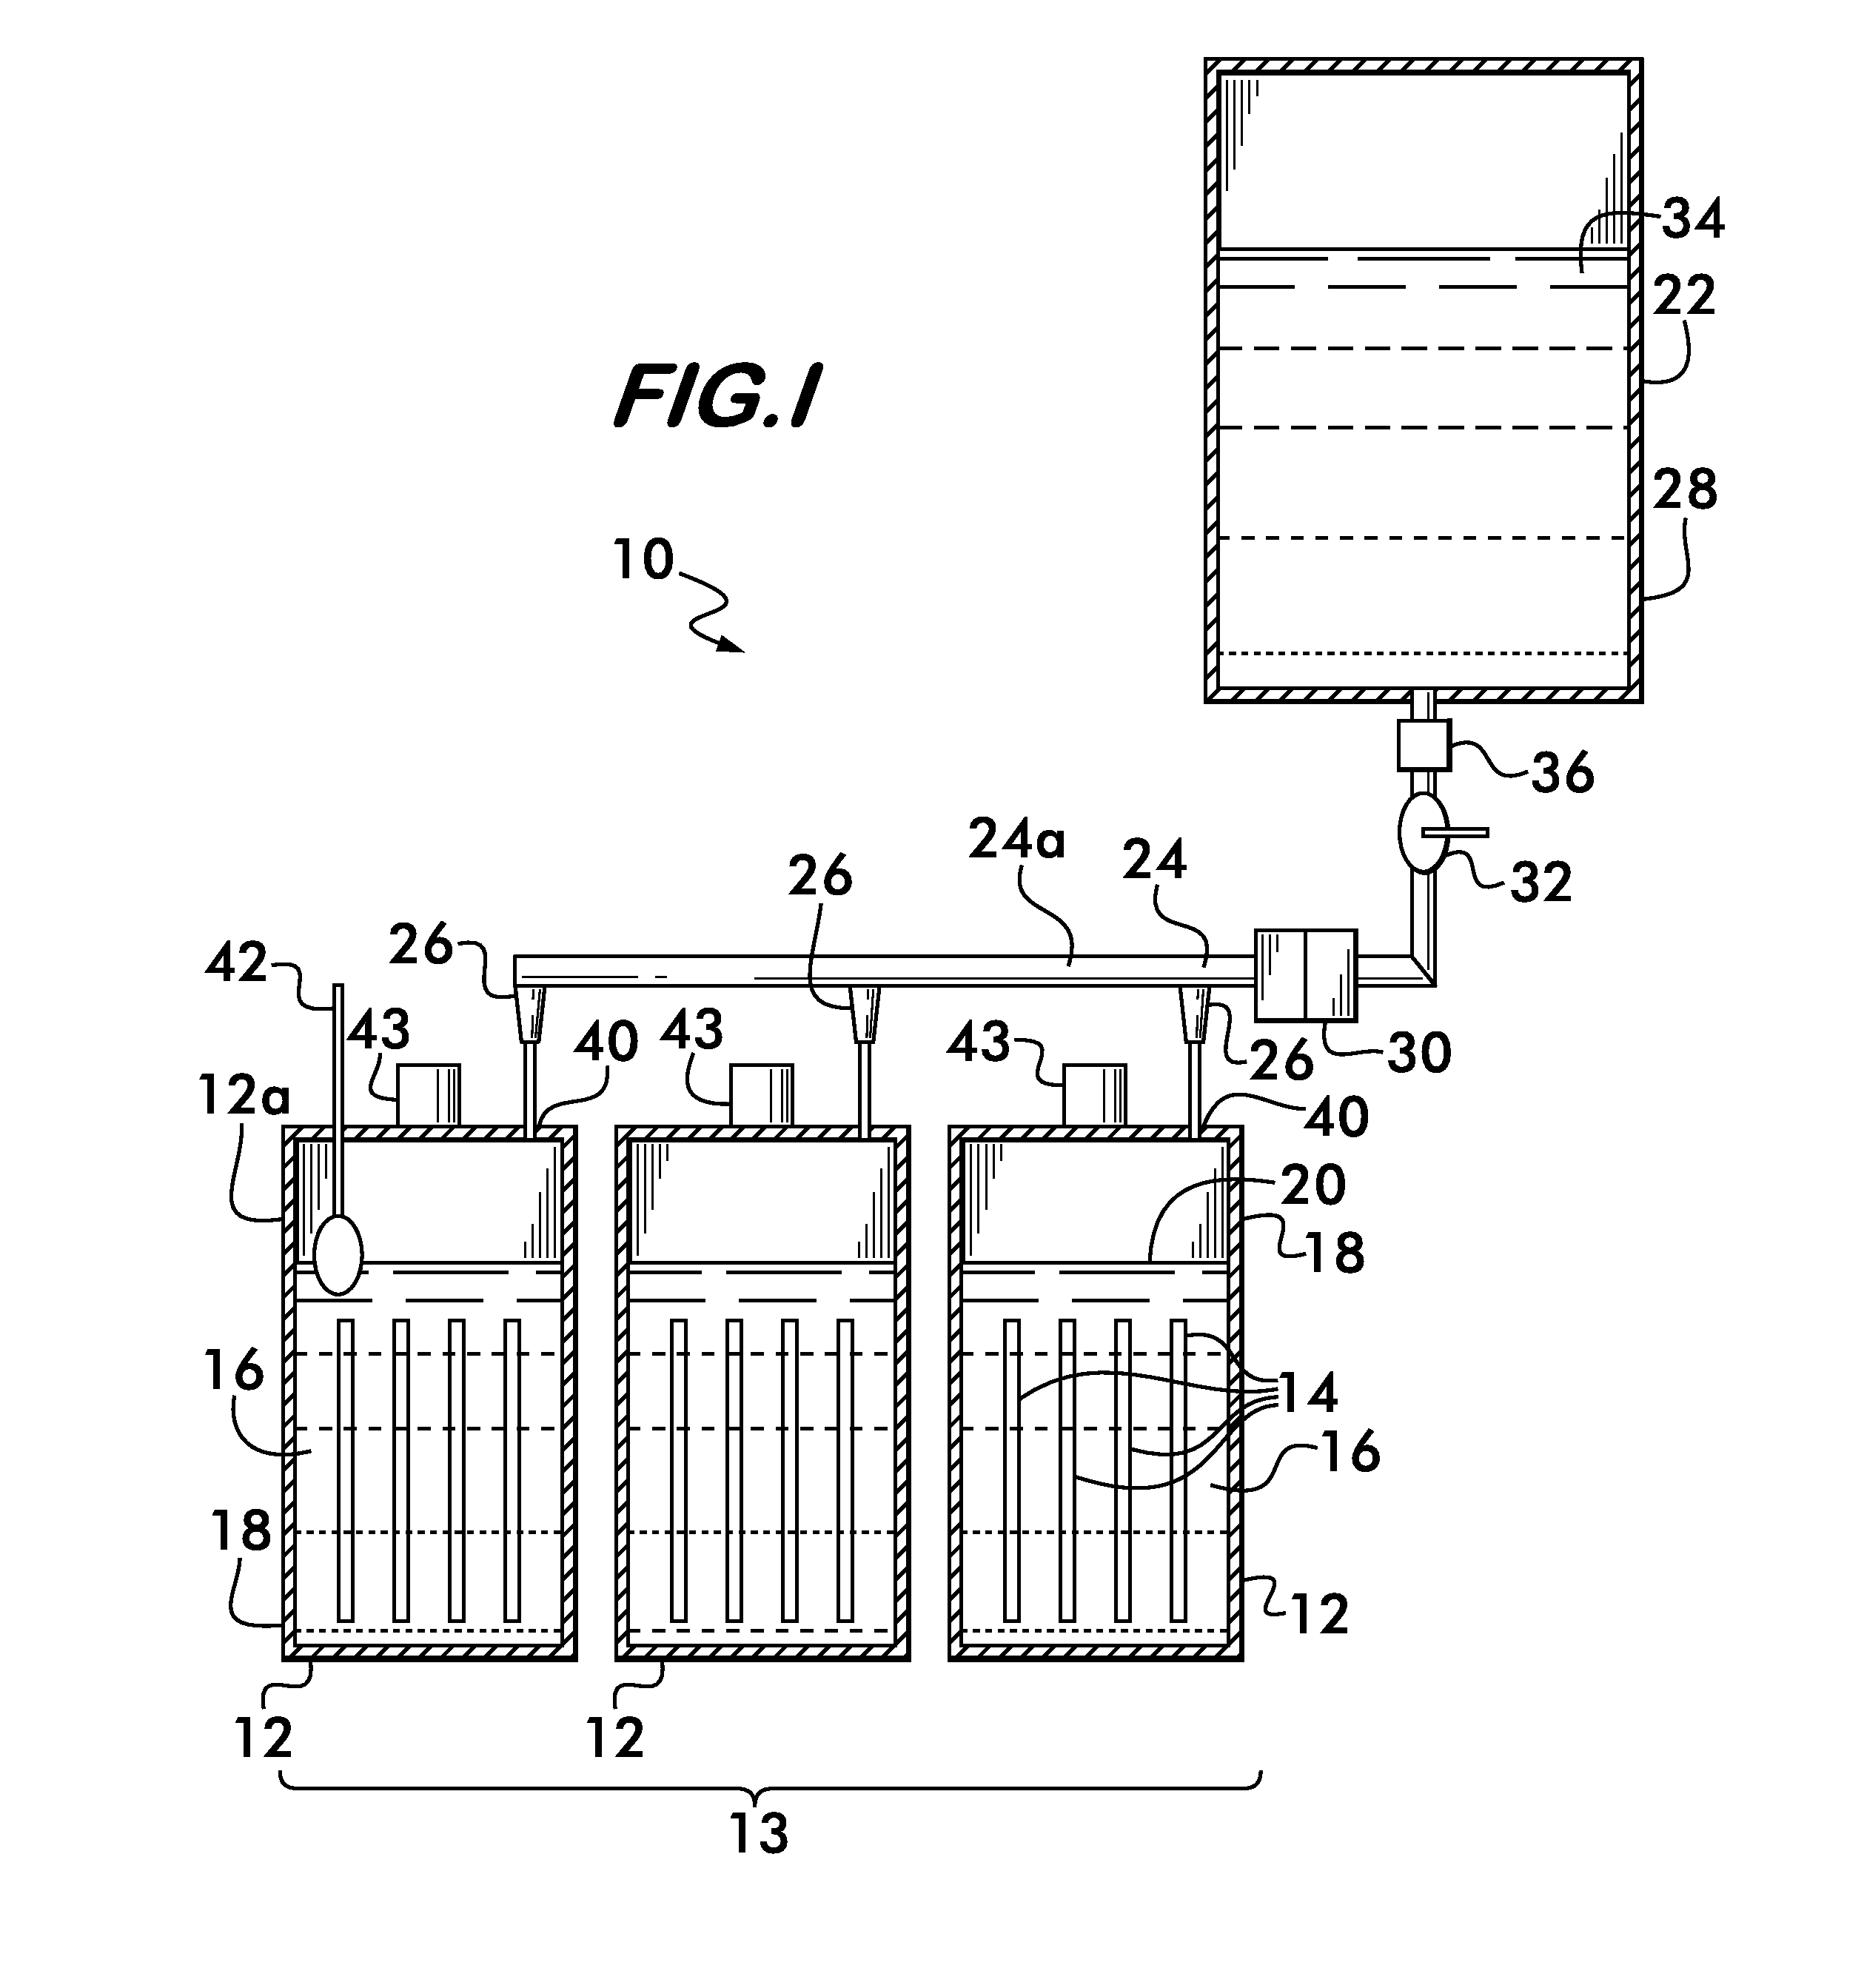 Battery watering system